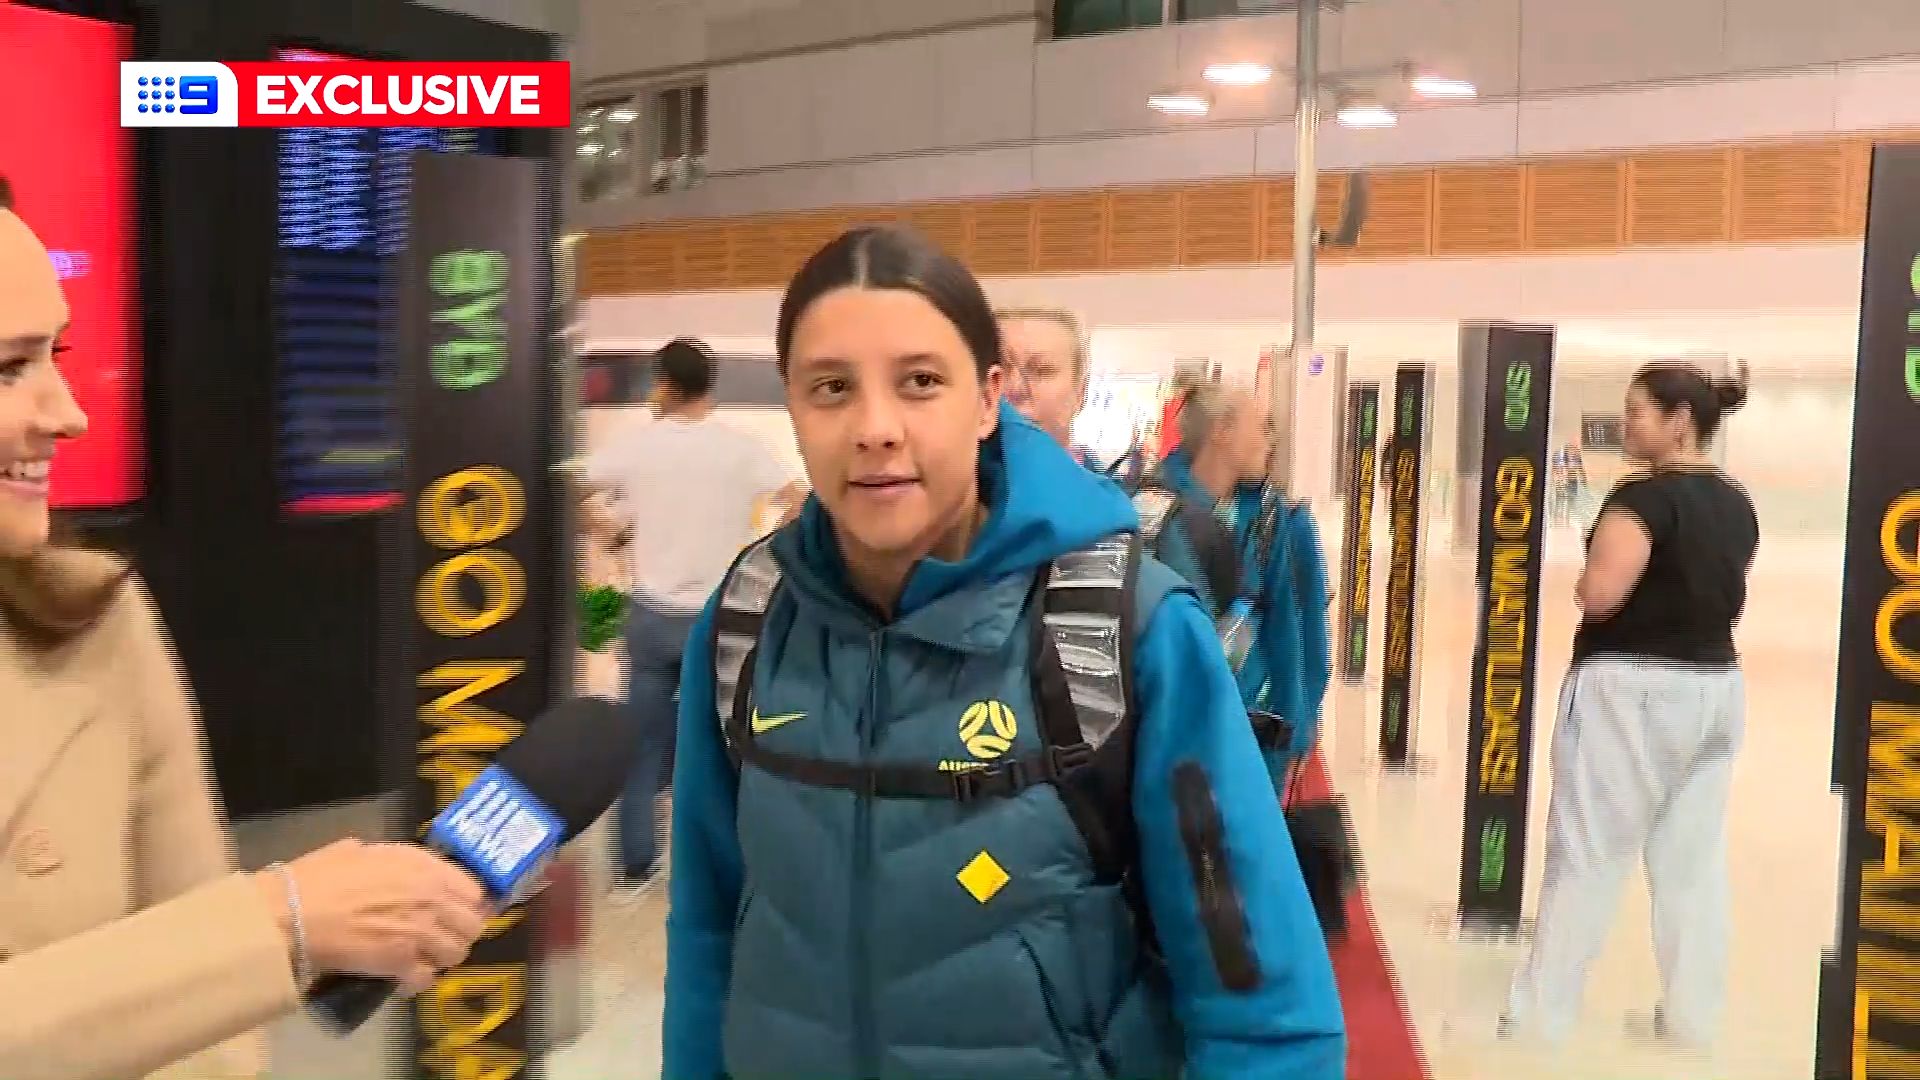 Sam Kerr confirms she 'will play' as Matildas zero in on do-or-die World Cup clash